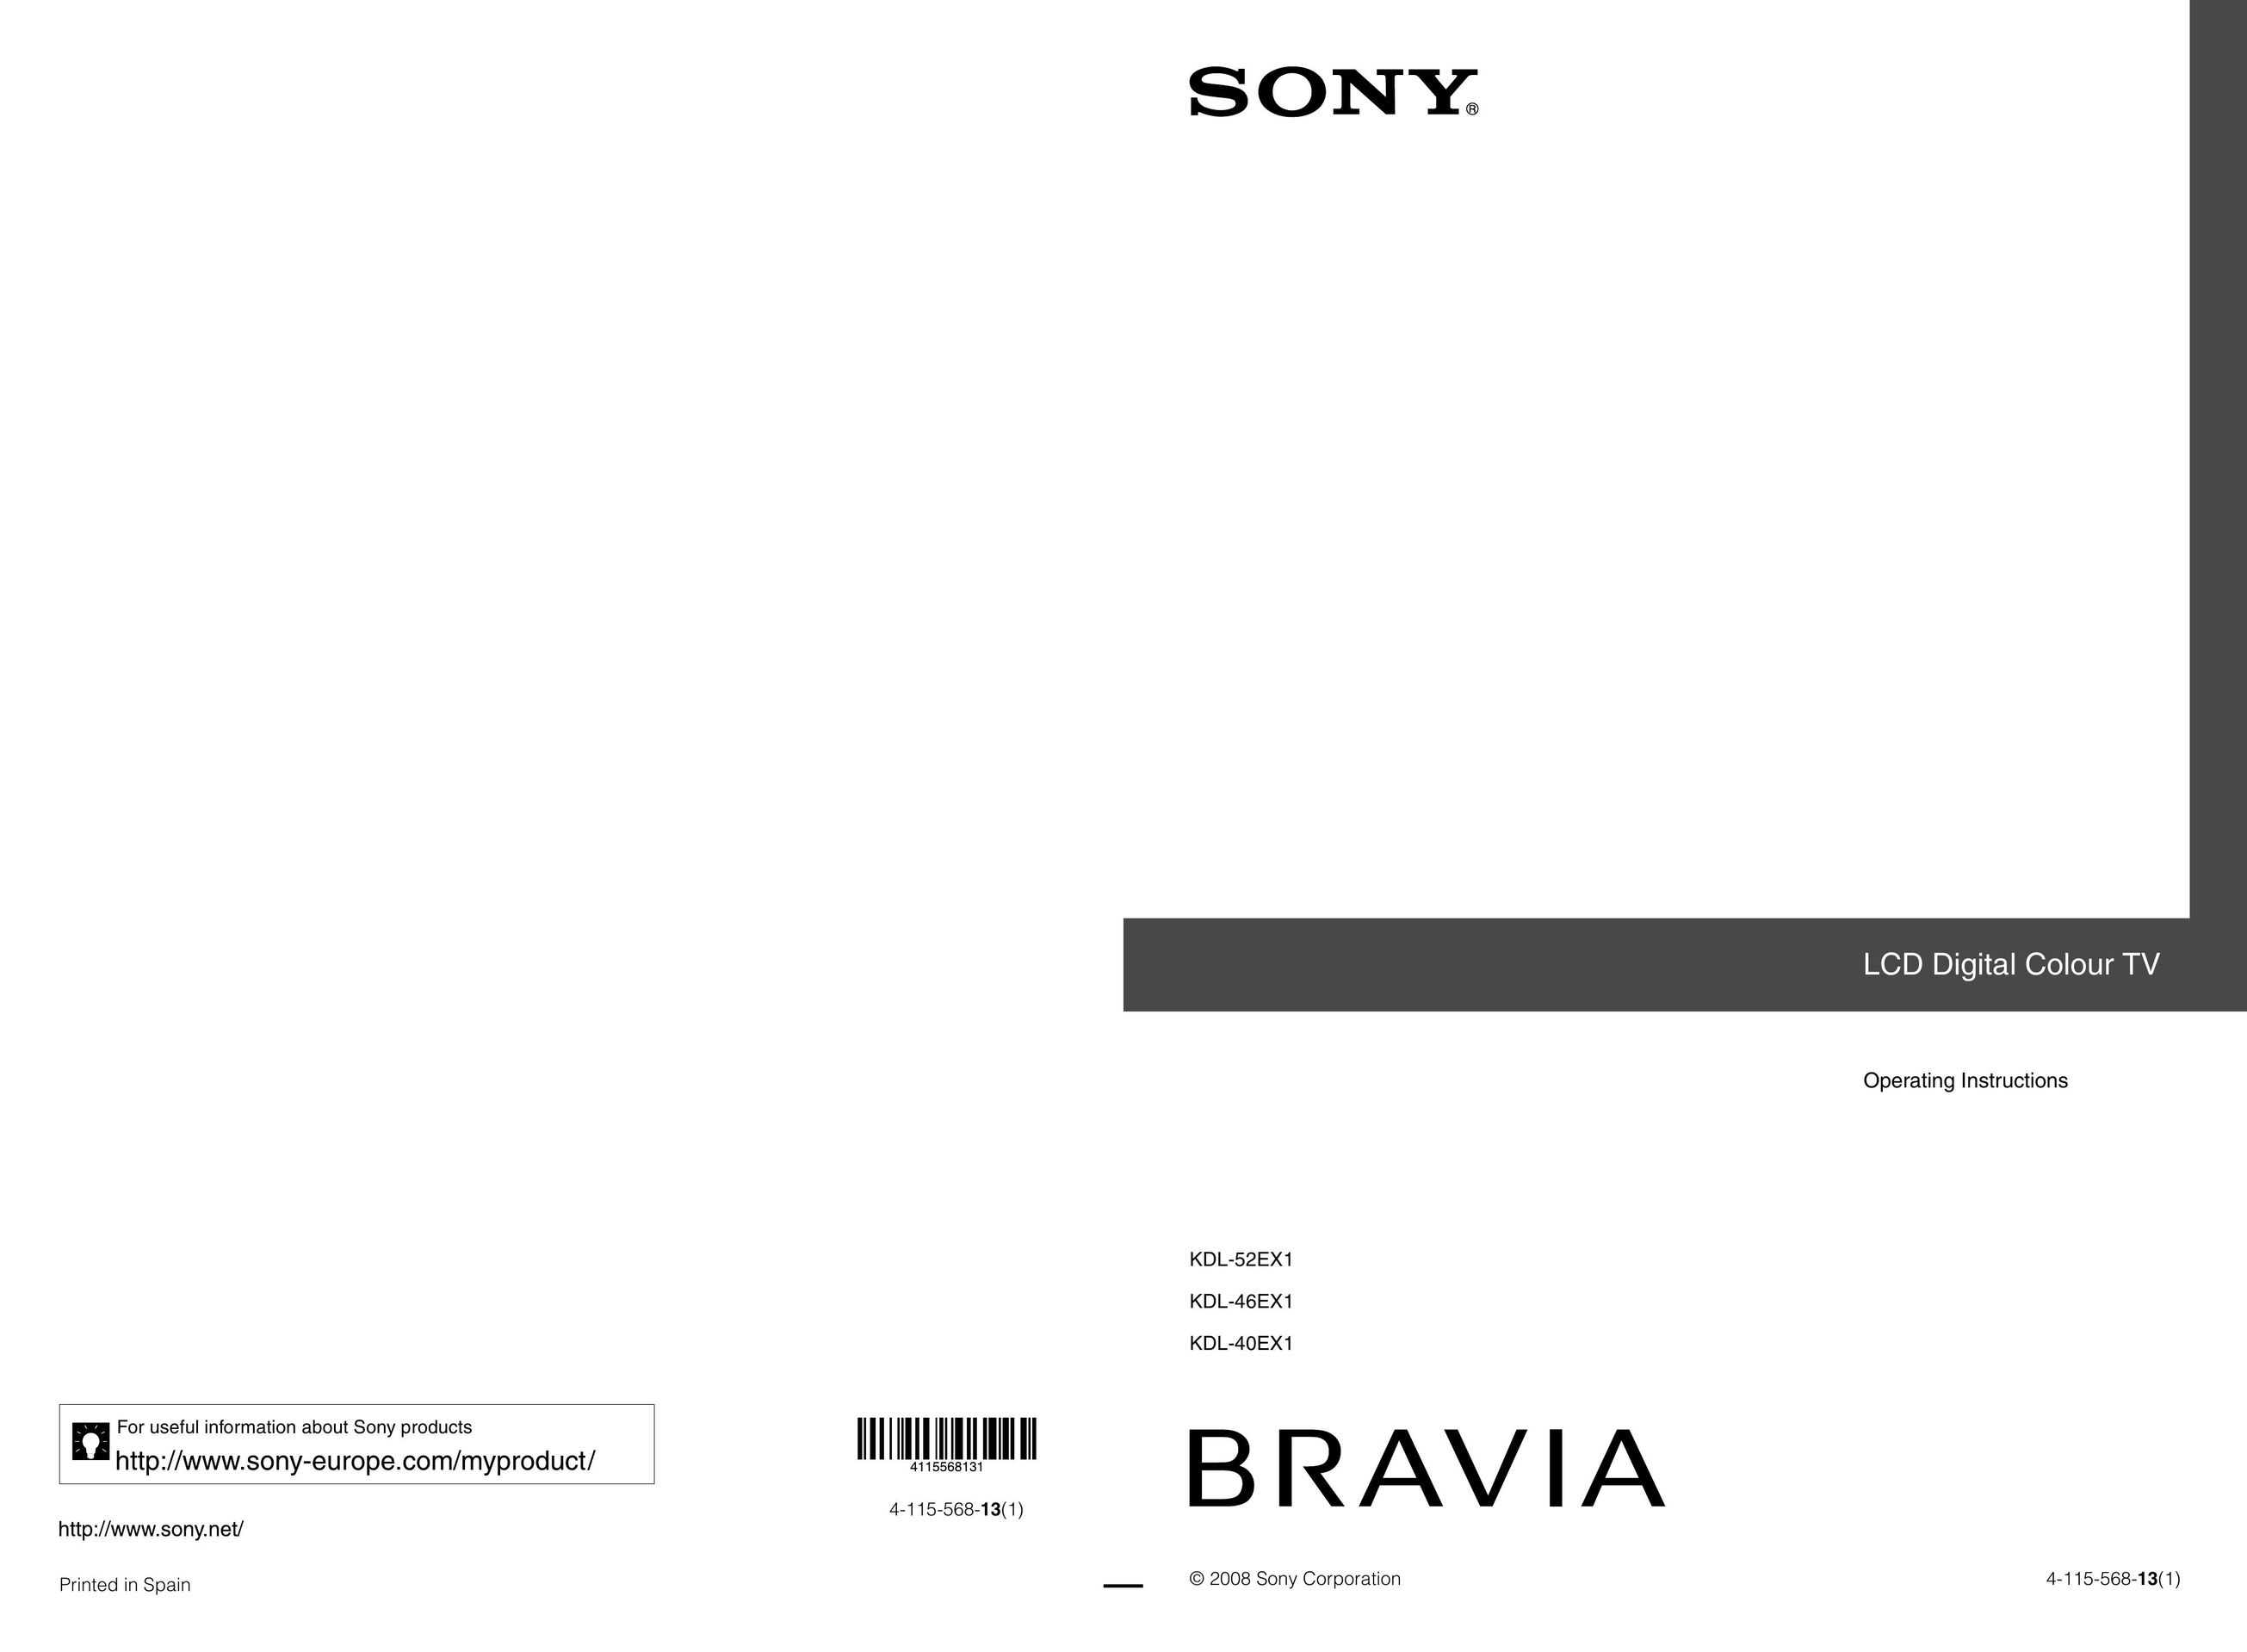 Sony 4-115-568-13(1) Flat Panel Television User Manual